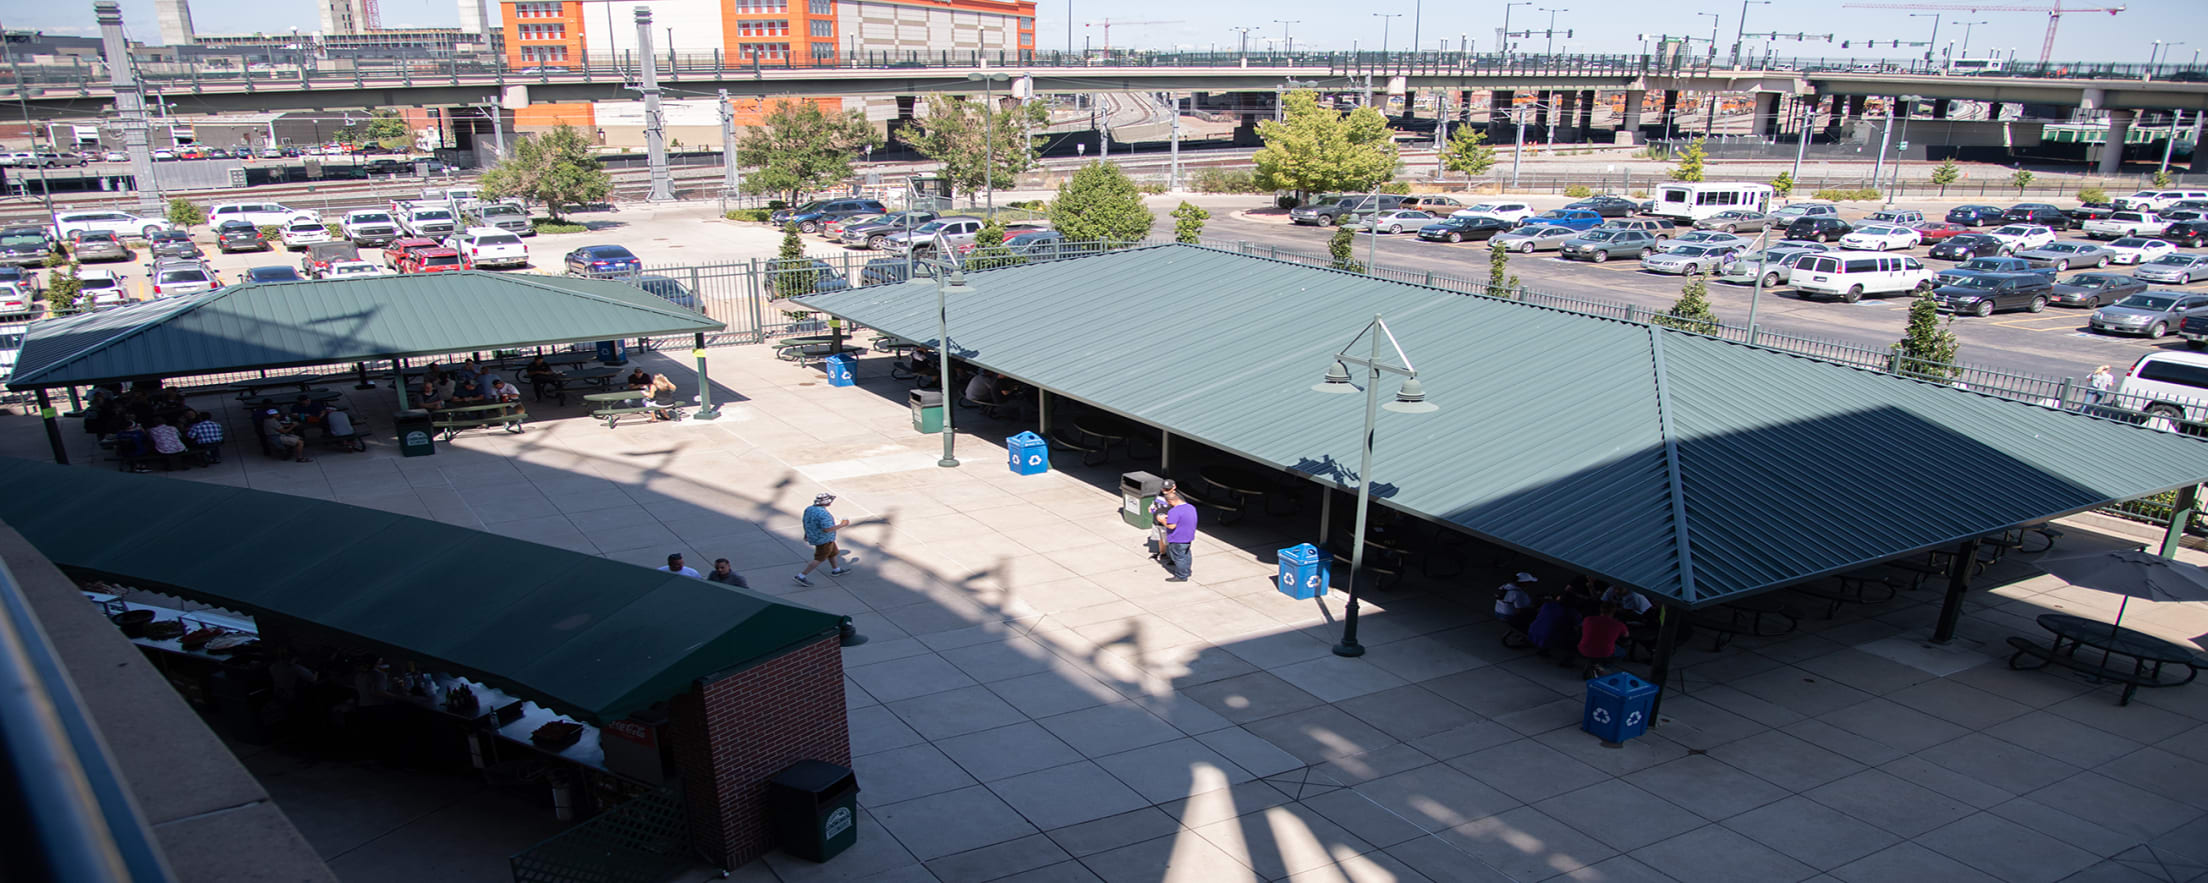 Shaded and Covered Seating at Coors Field 